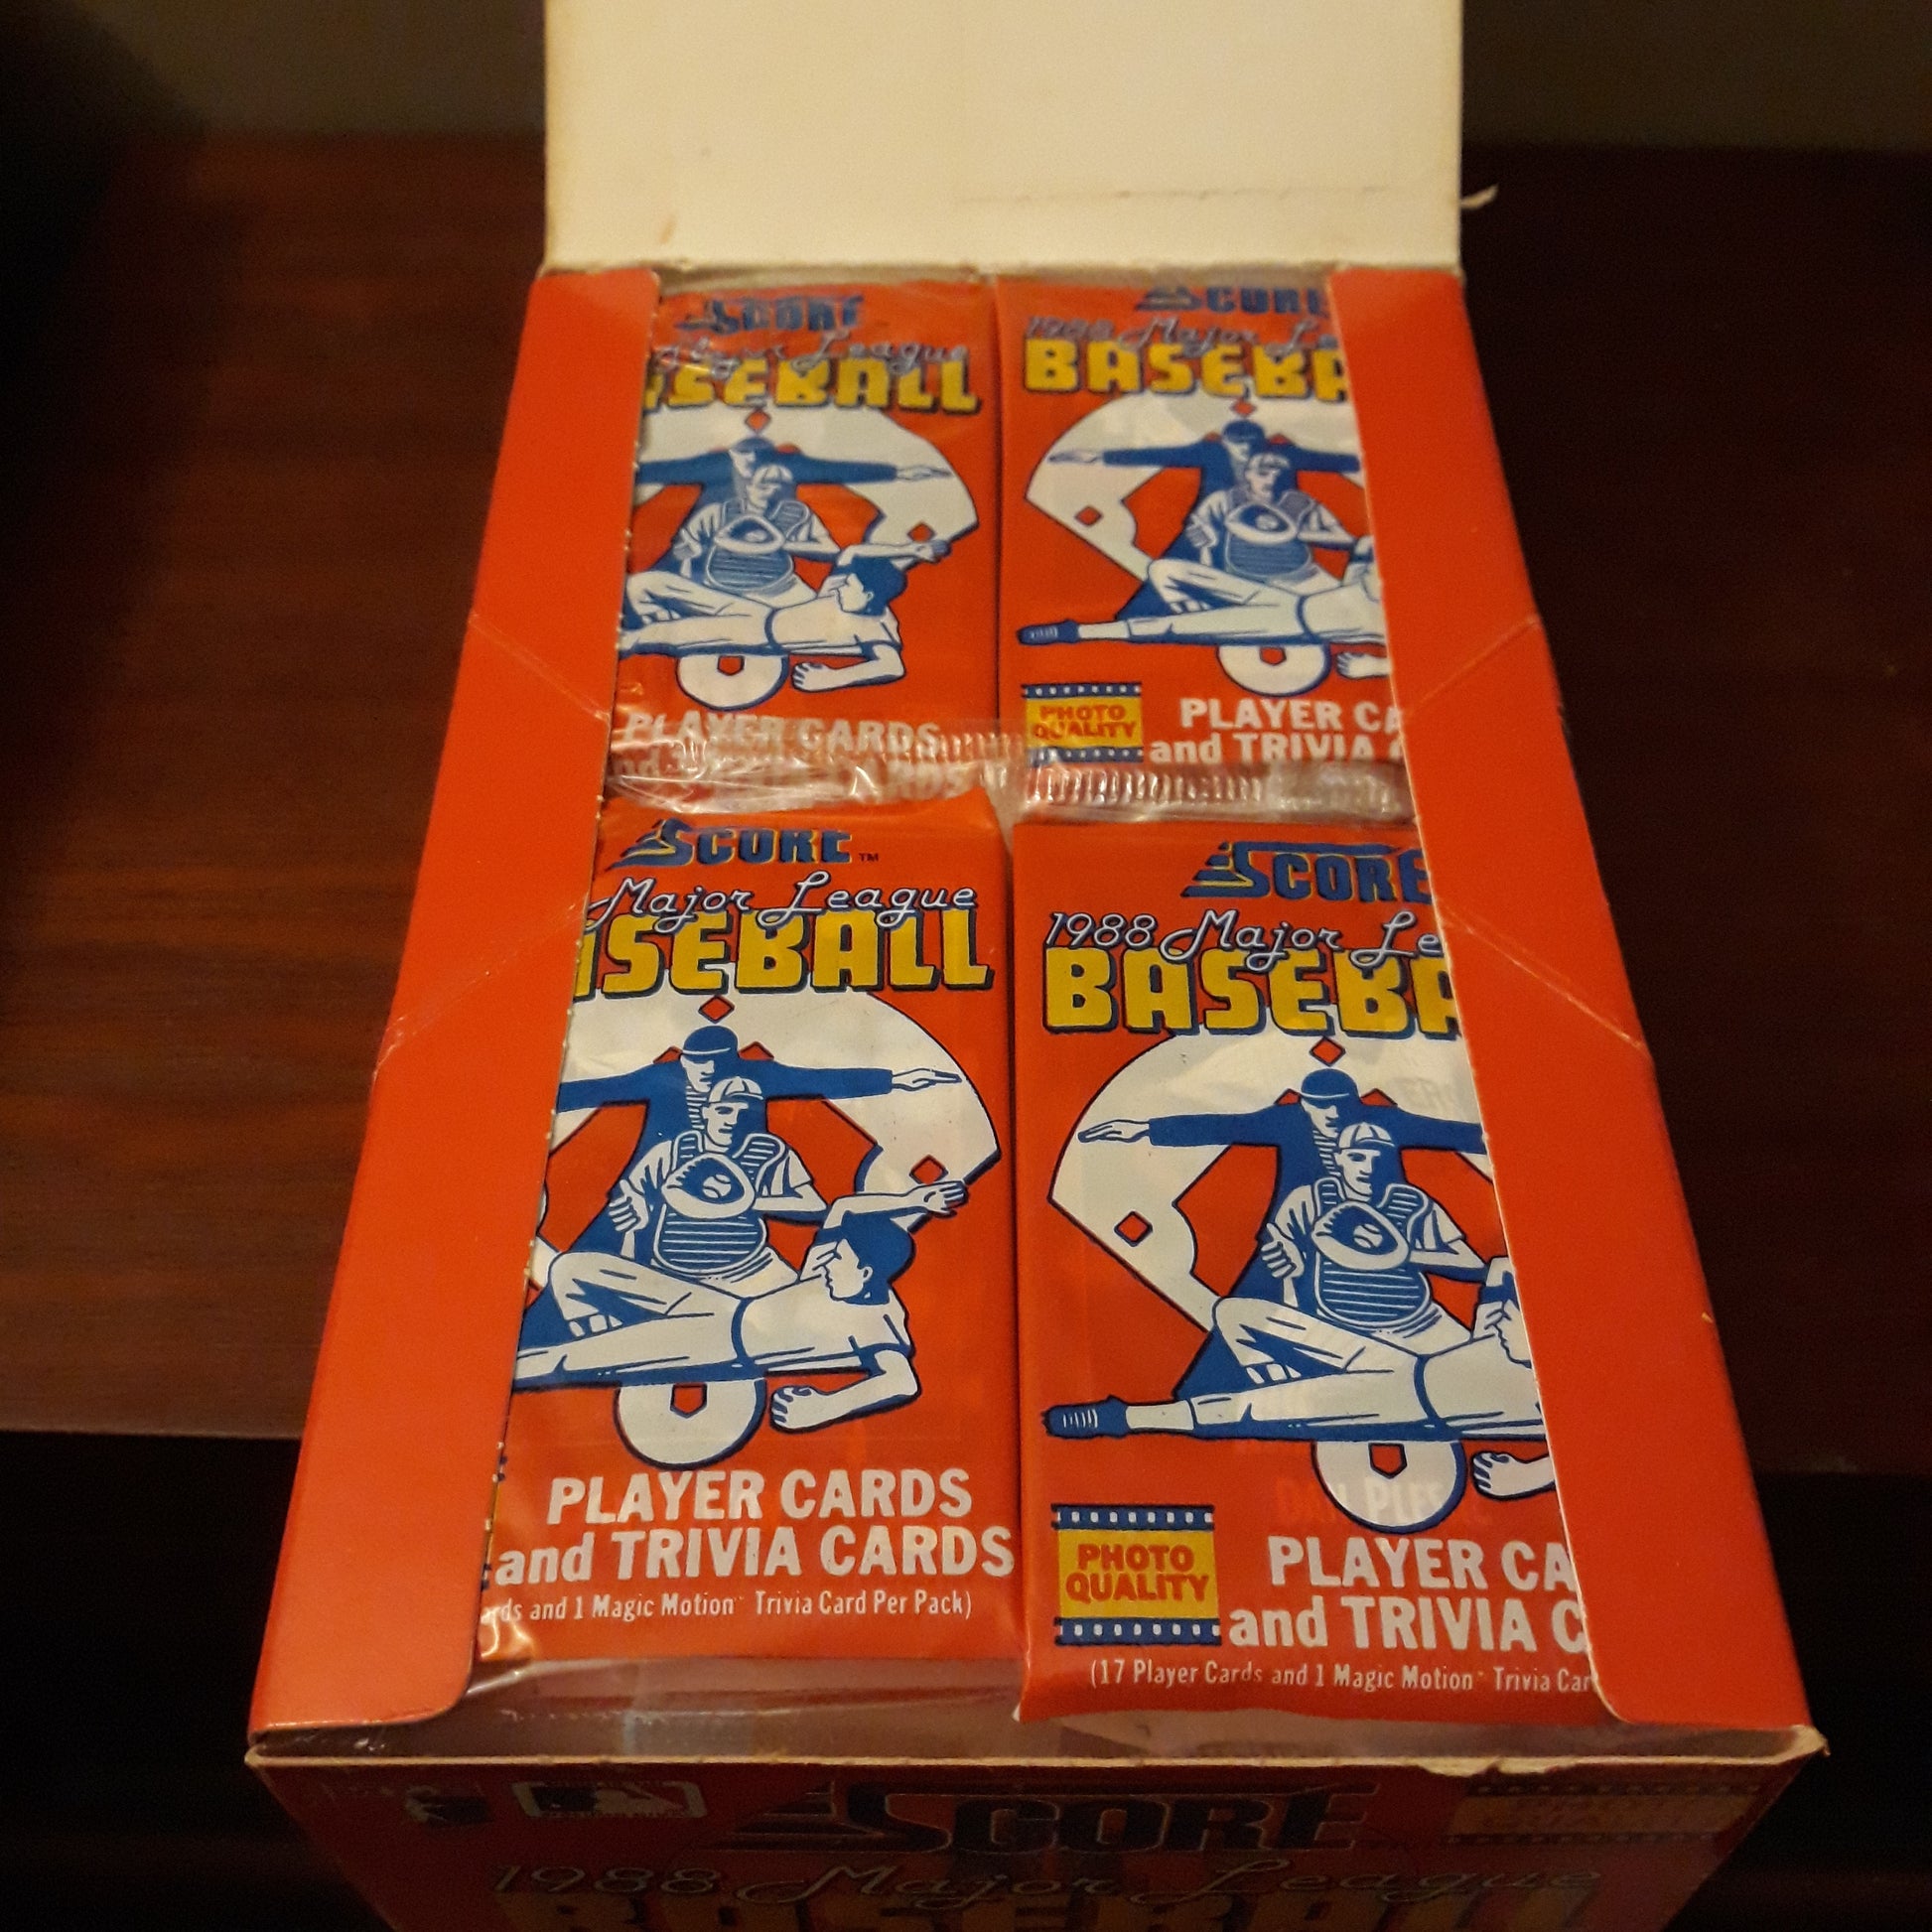 Score 1988 Major League Baseball Player Cards and Trivia Cards